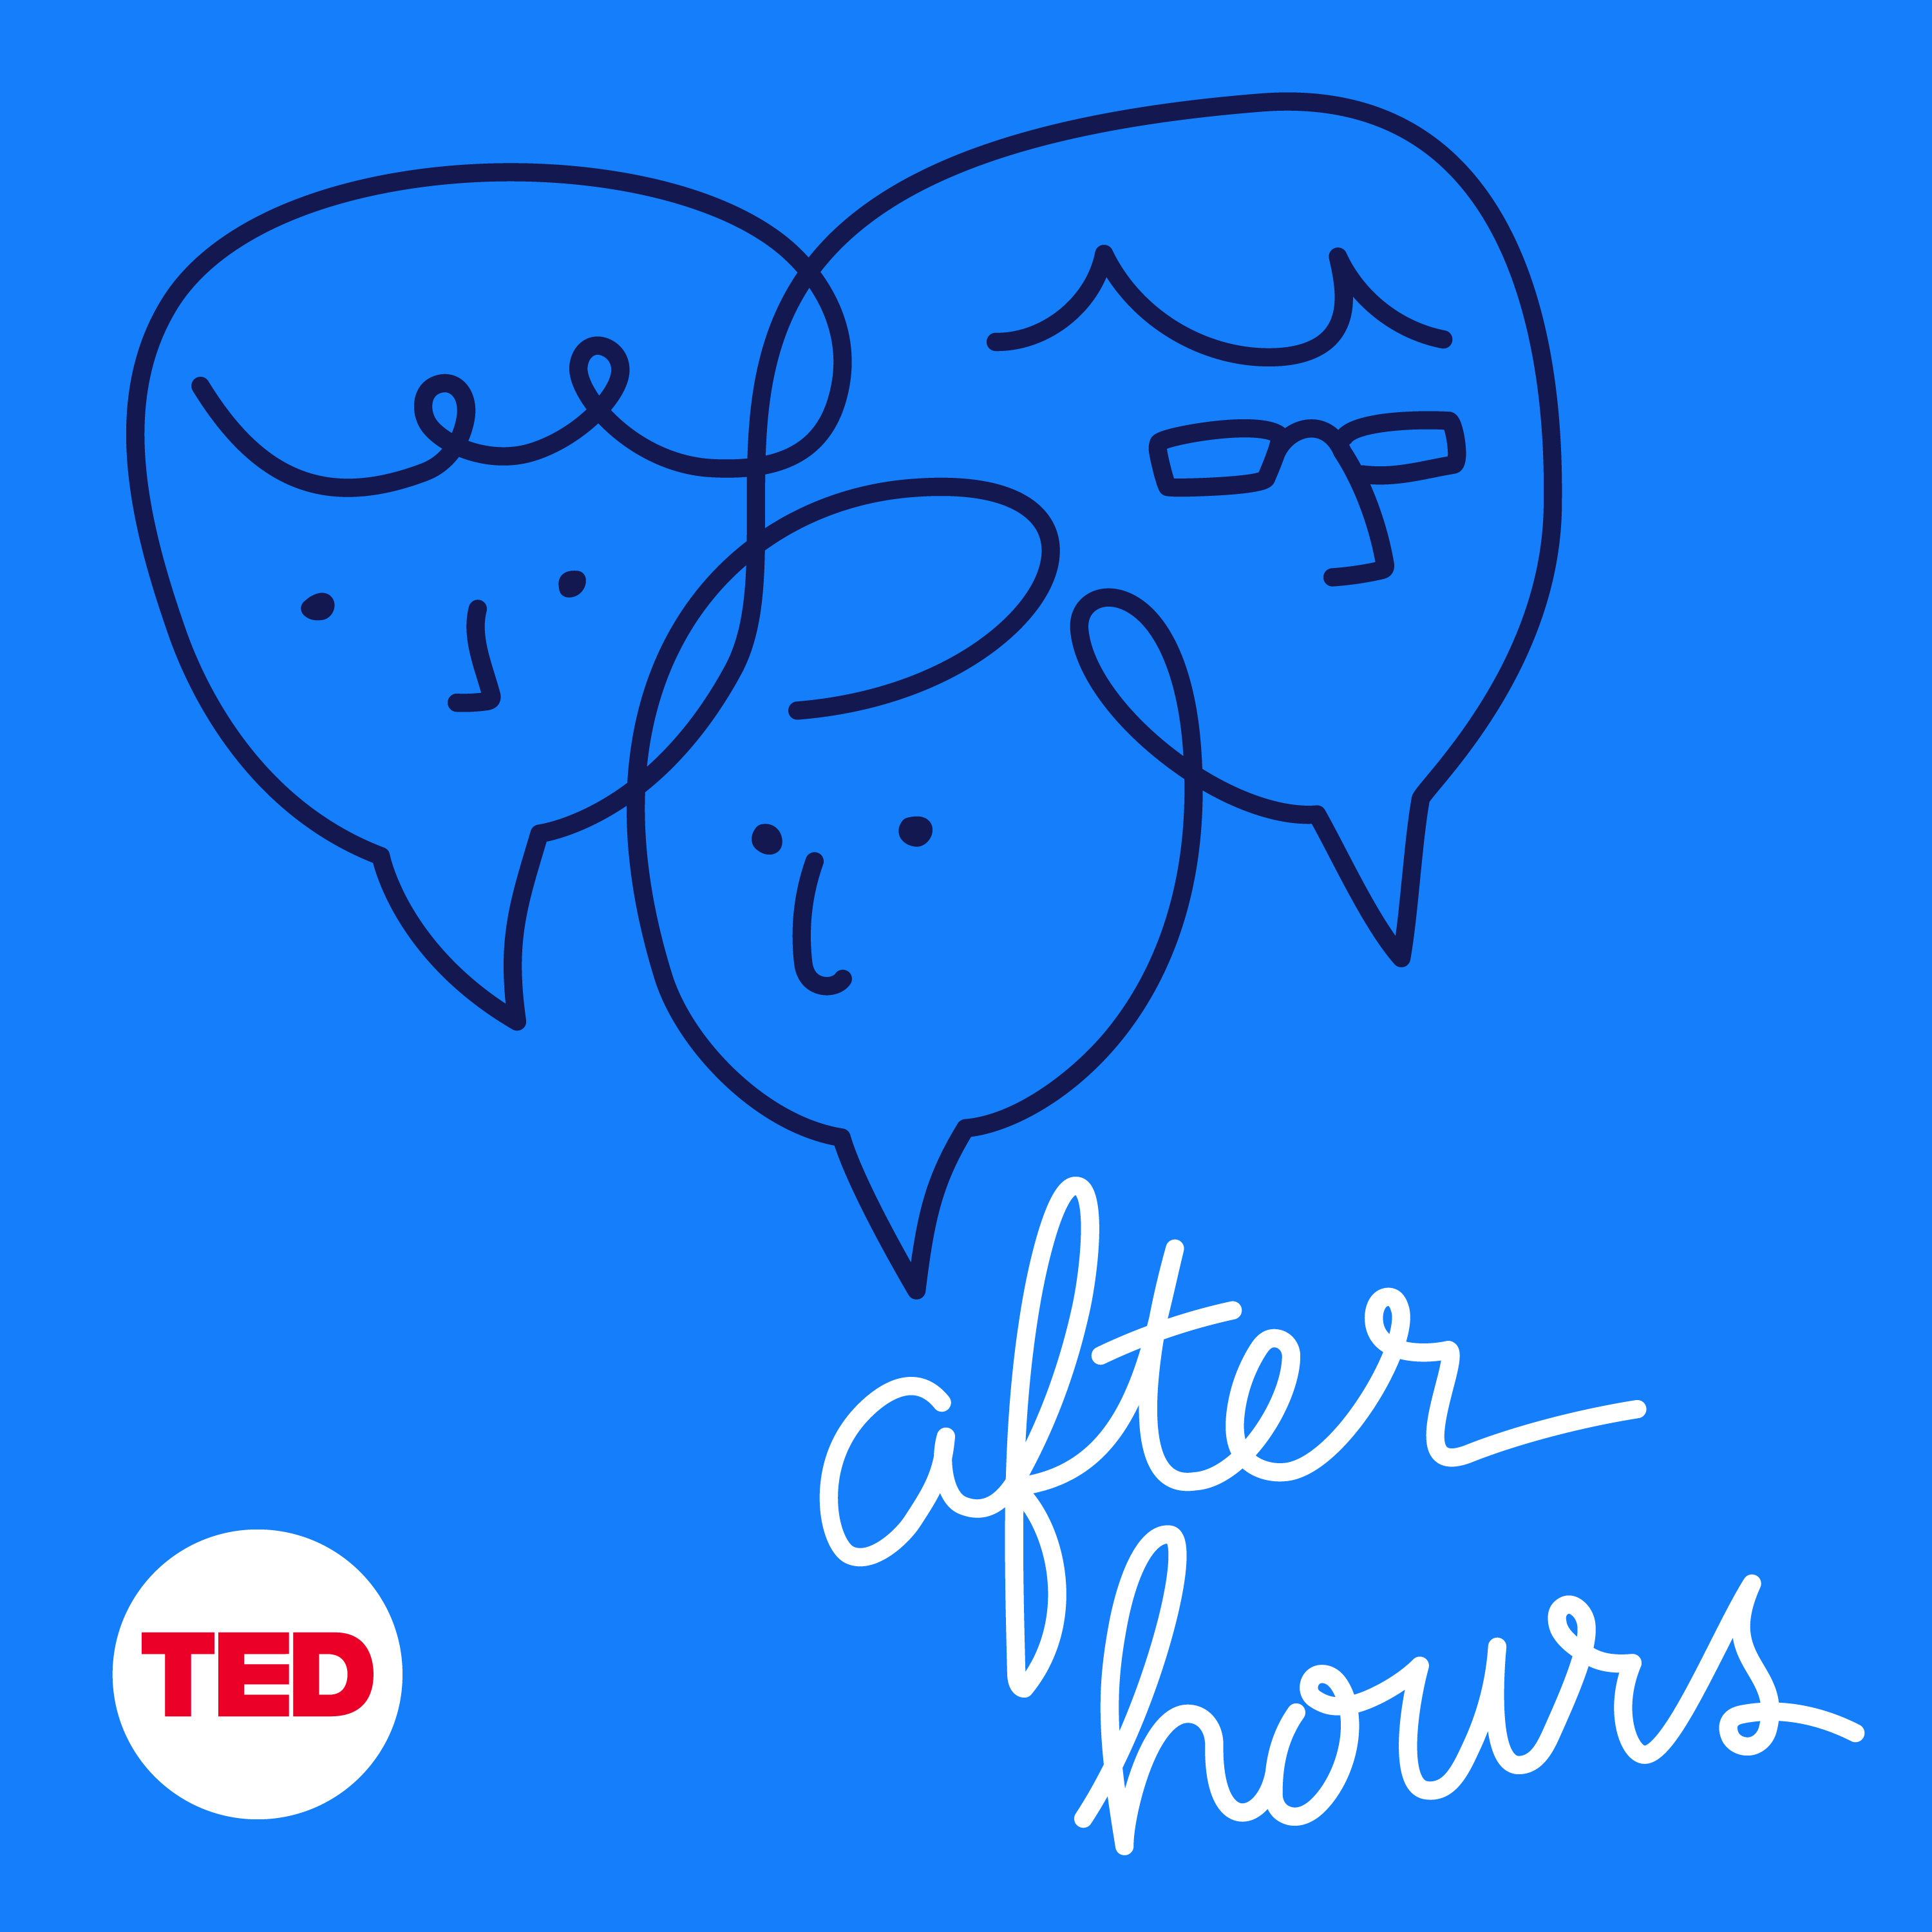 After Hours:TED Audio Collective / Youngme Moon, Mihir Desai, & Felix Oberholzer-Gee